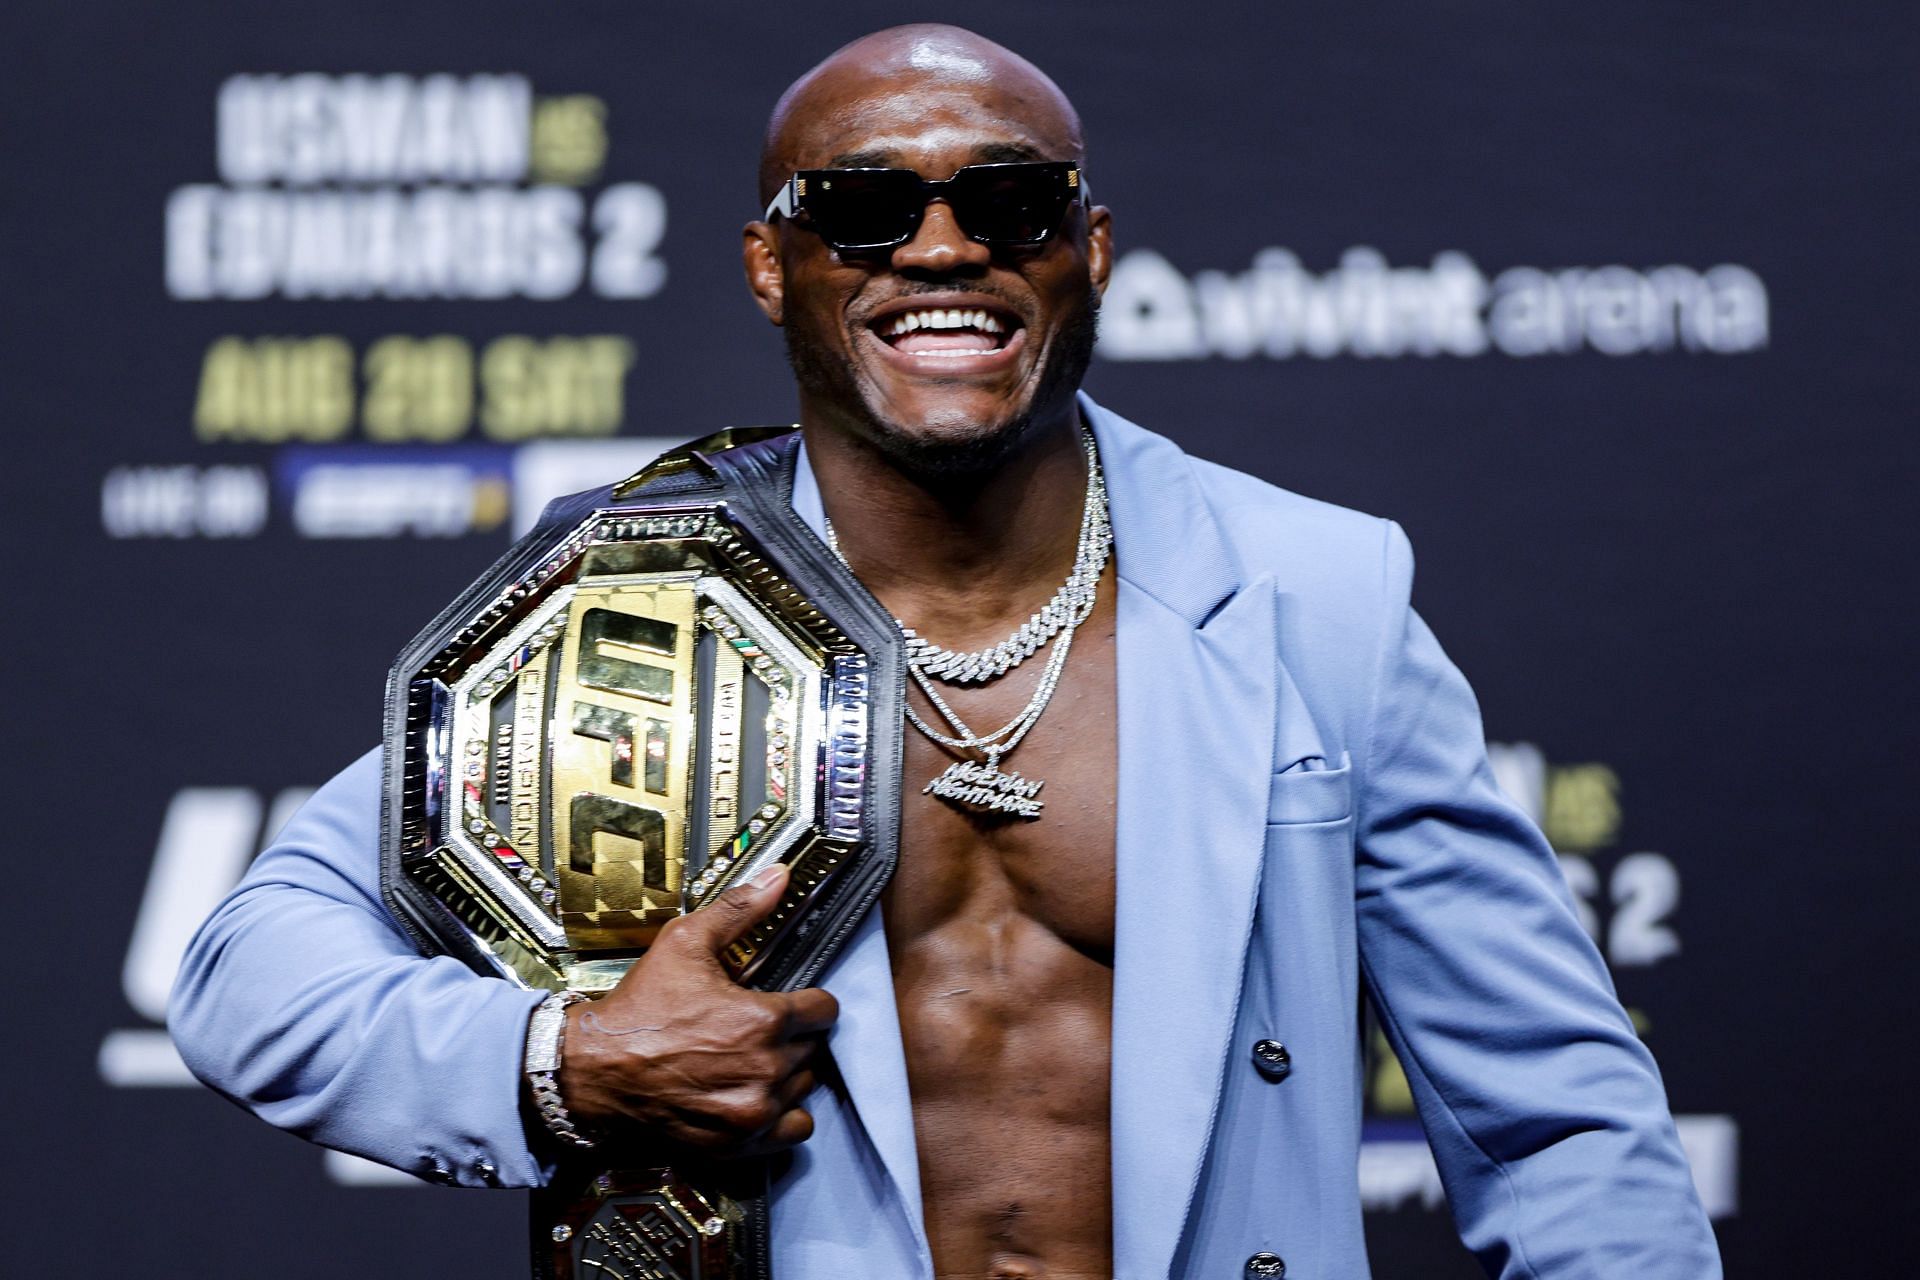 Current welterweight kingpin Kamaru Usman is the most successful TUF winner in UFC history